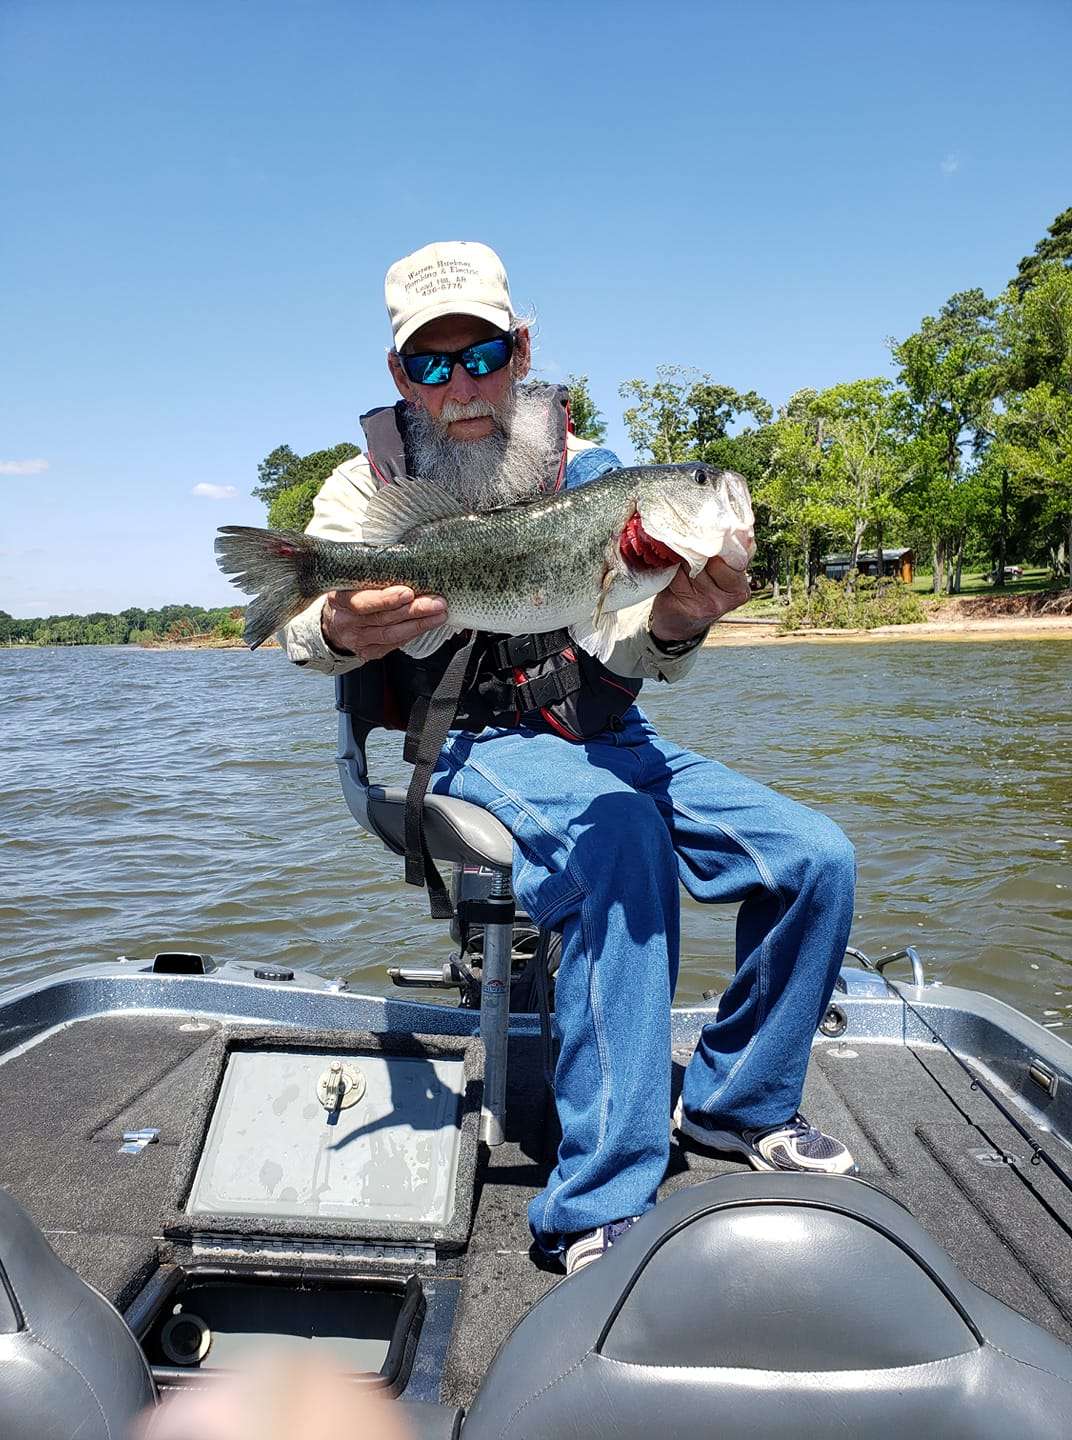 Richie Huebner, Facebook<BR>
Sam Rayburn Reservoir<BR>
Sam Rayburn with my dad! Best trip of my life!! Dad is an x pro but now has dementia and Alzheimer at 68 but can still catch them with the best!! We still love our home lake of Bull Shoals.

